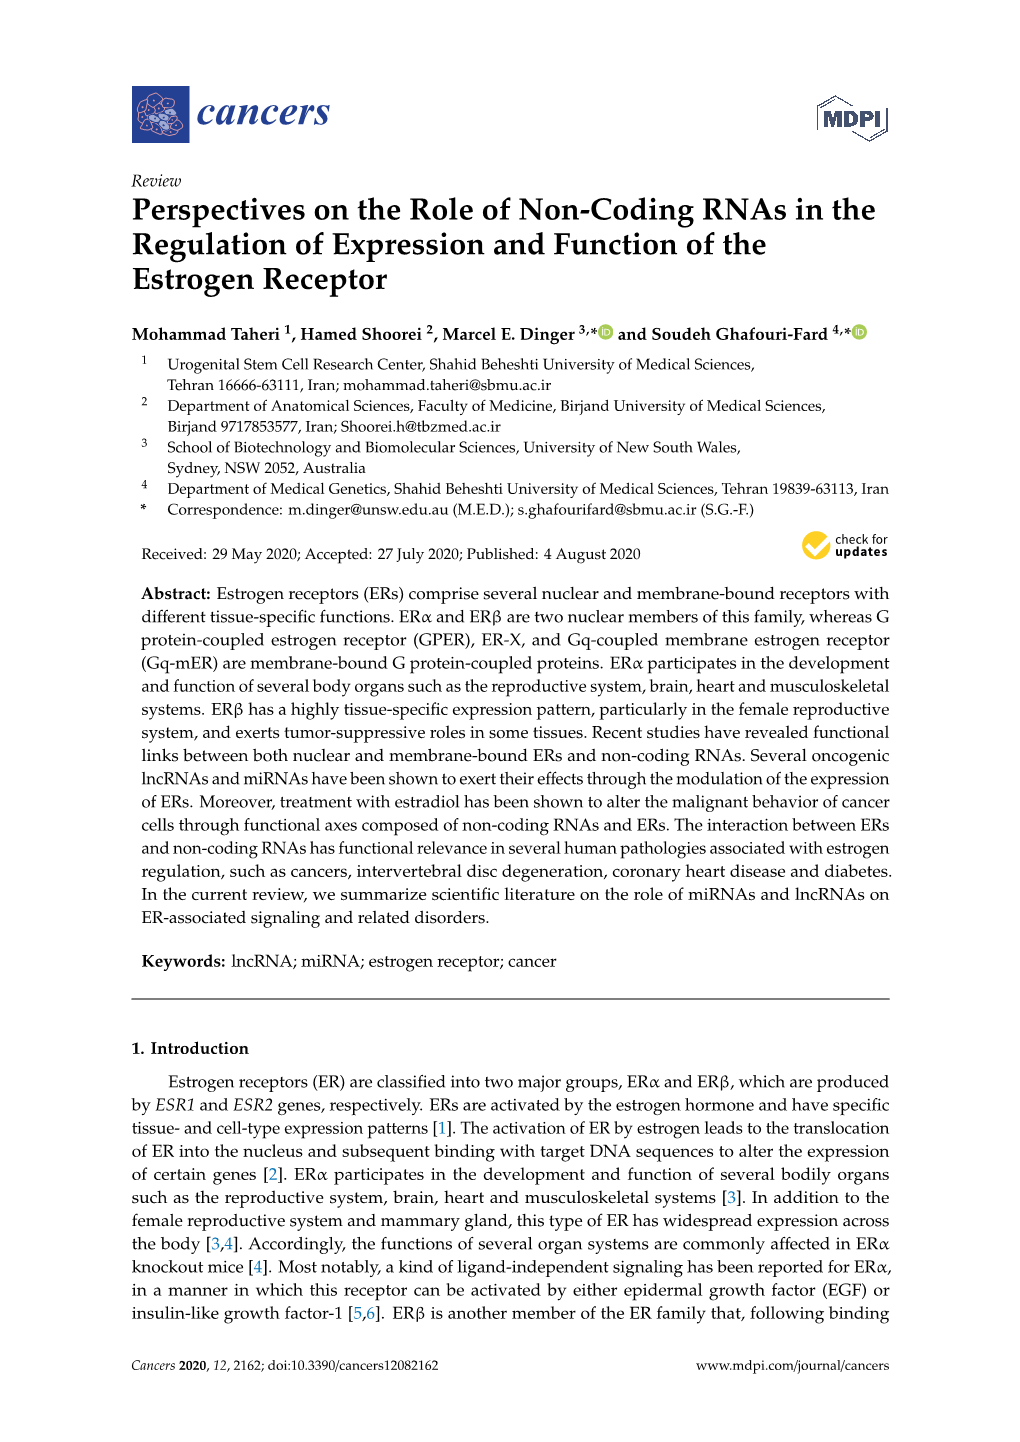 Perspectives on the Role of Non-Coding Rnas in the Regulation of Expression and Function of the Estrogen Receptor